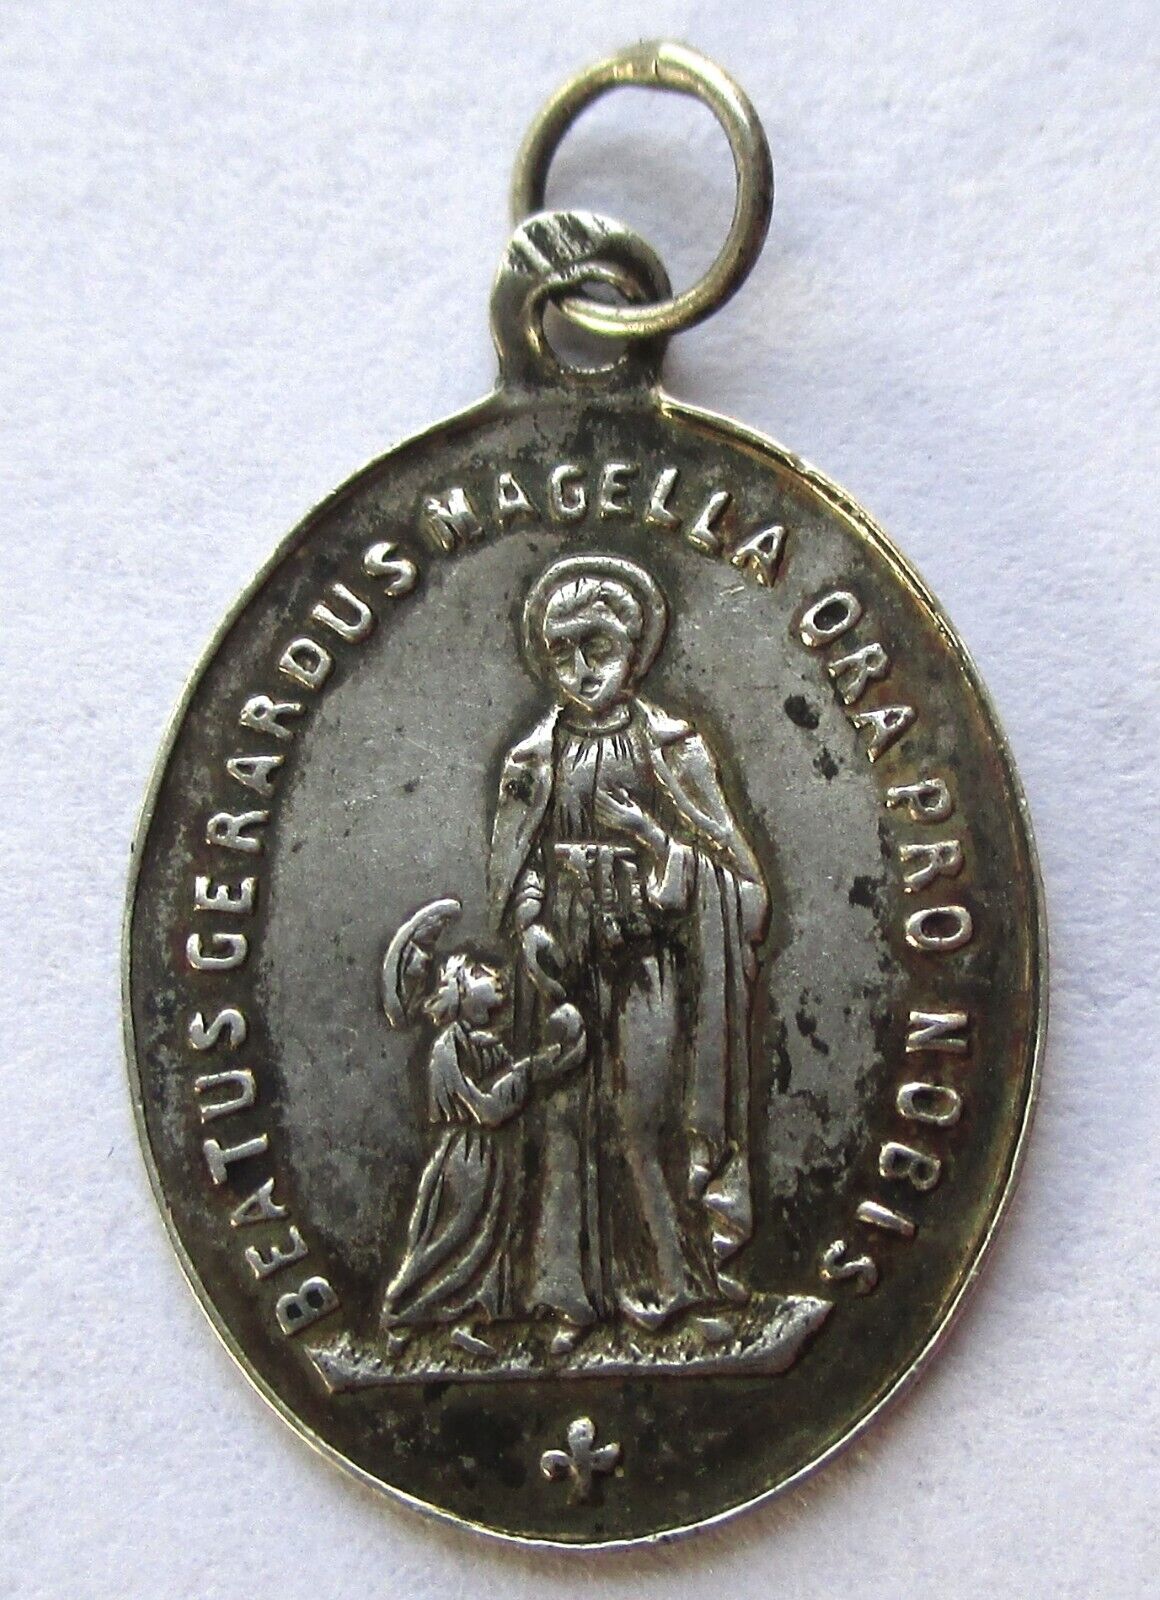 VINTAGE ANTIQUE FRENCH HALLMARK STERLING SILVER RELIGIOUS MEDAL CHARM MONTAIGU